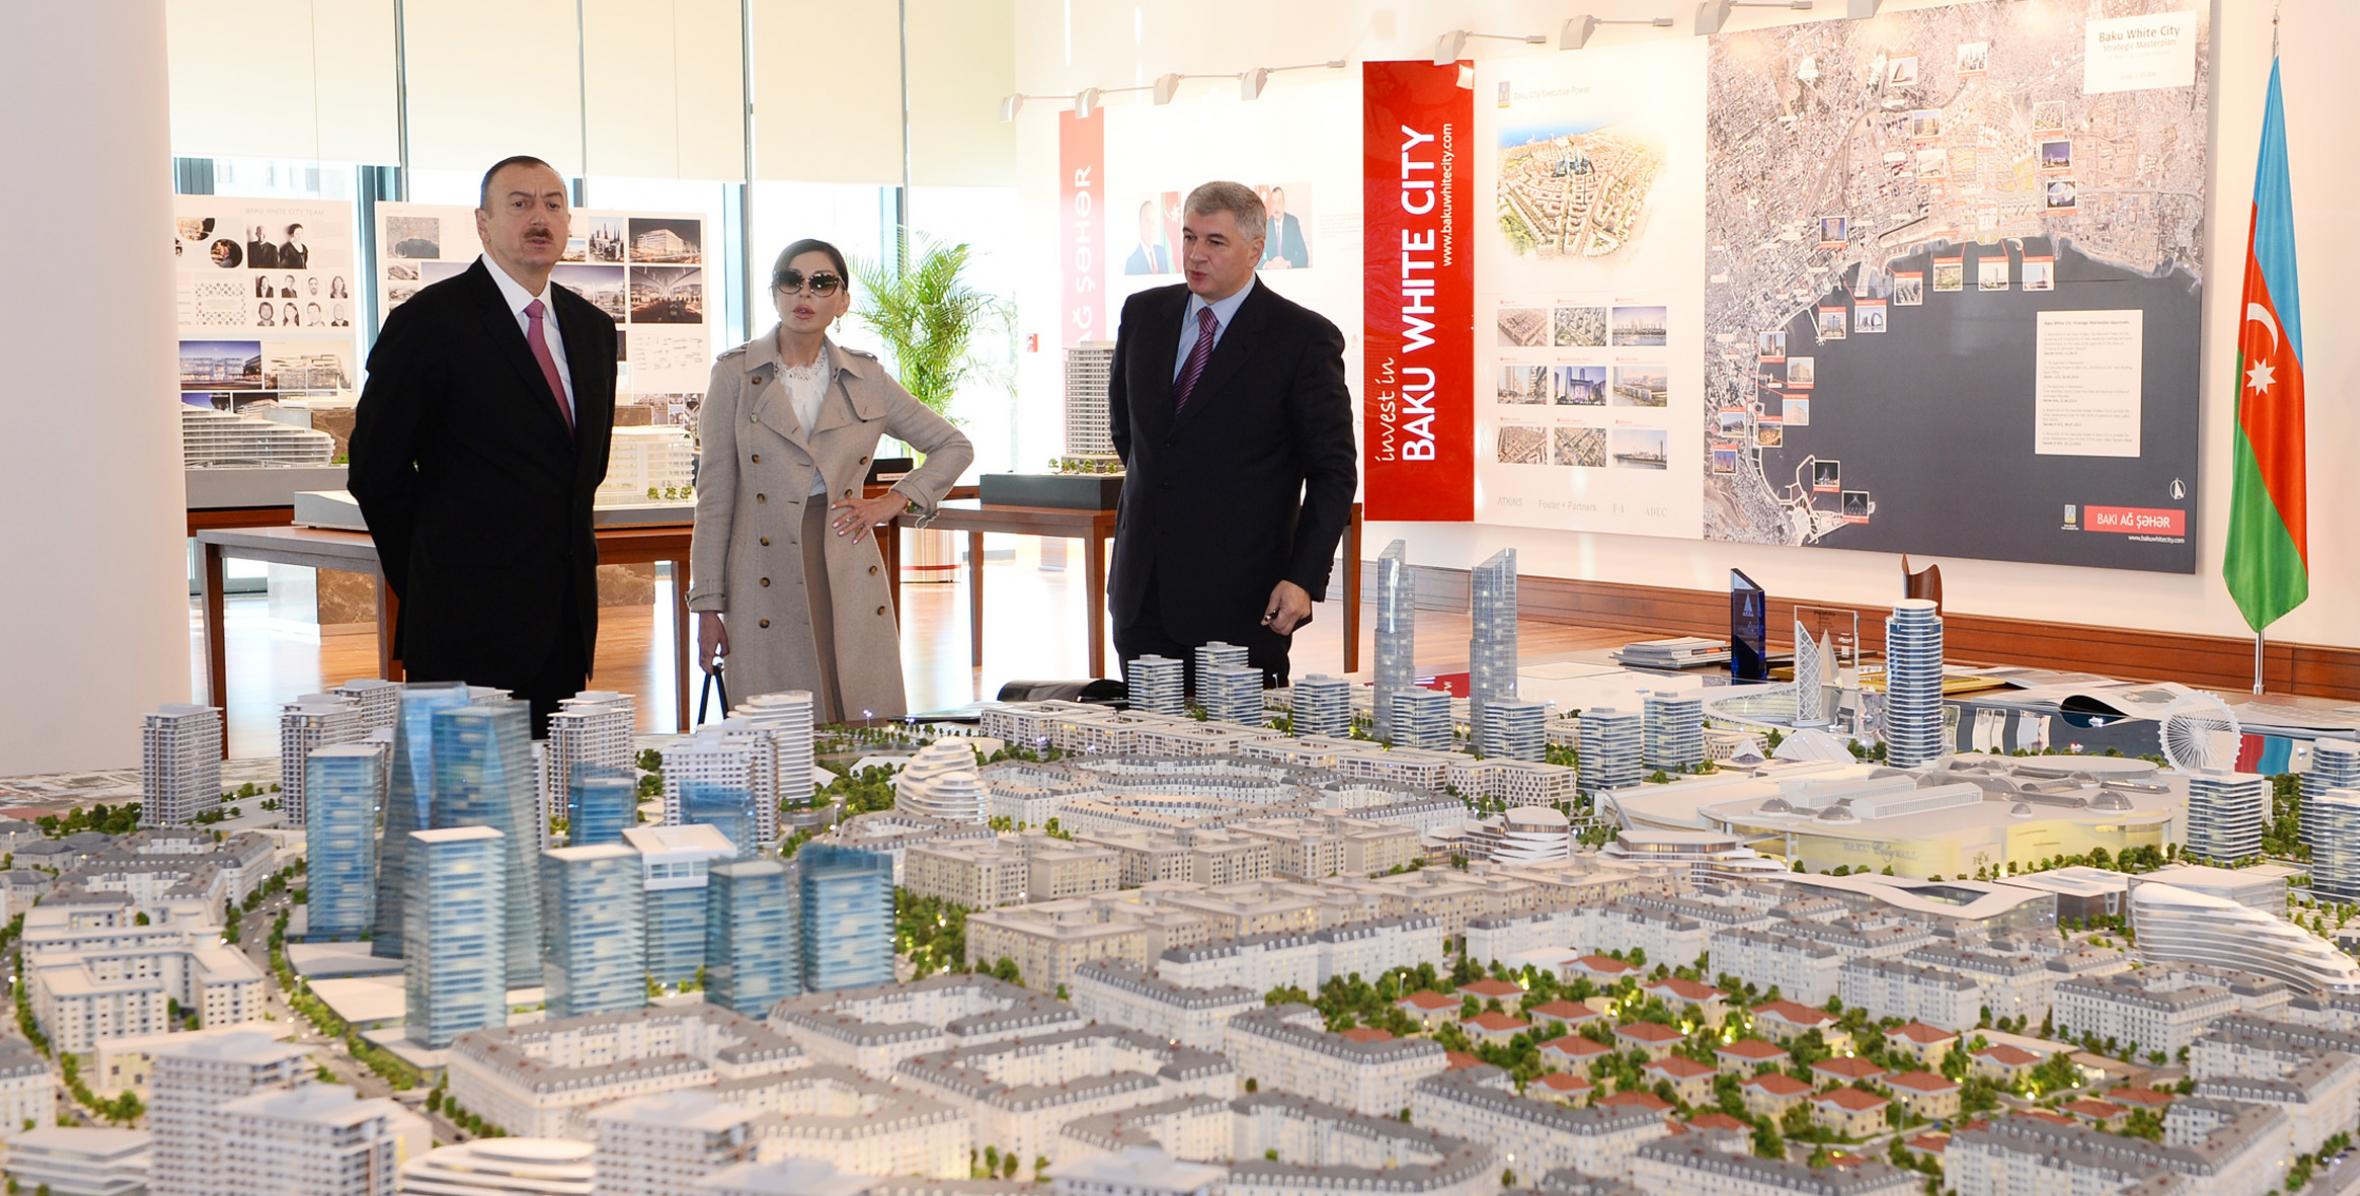 Ilham Aliyev reviewed an office building of the Baku White City